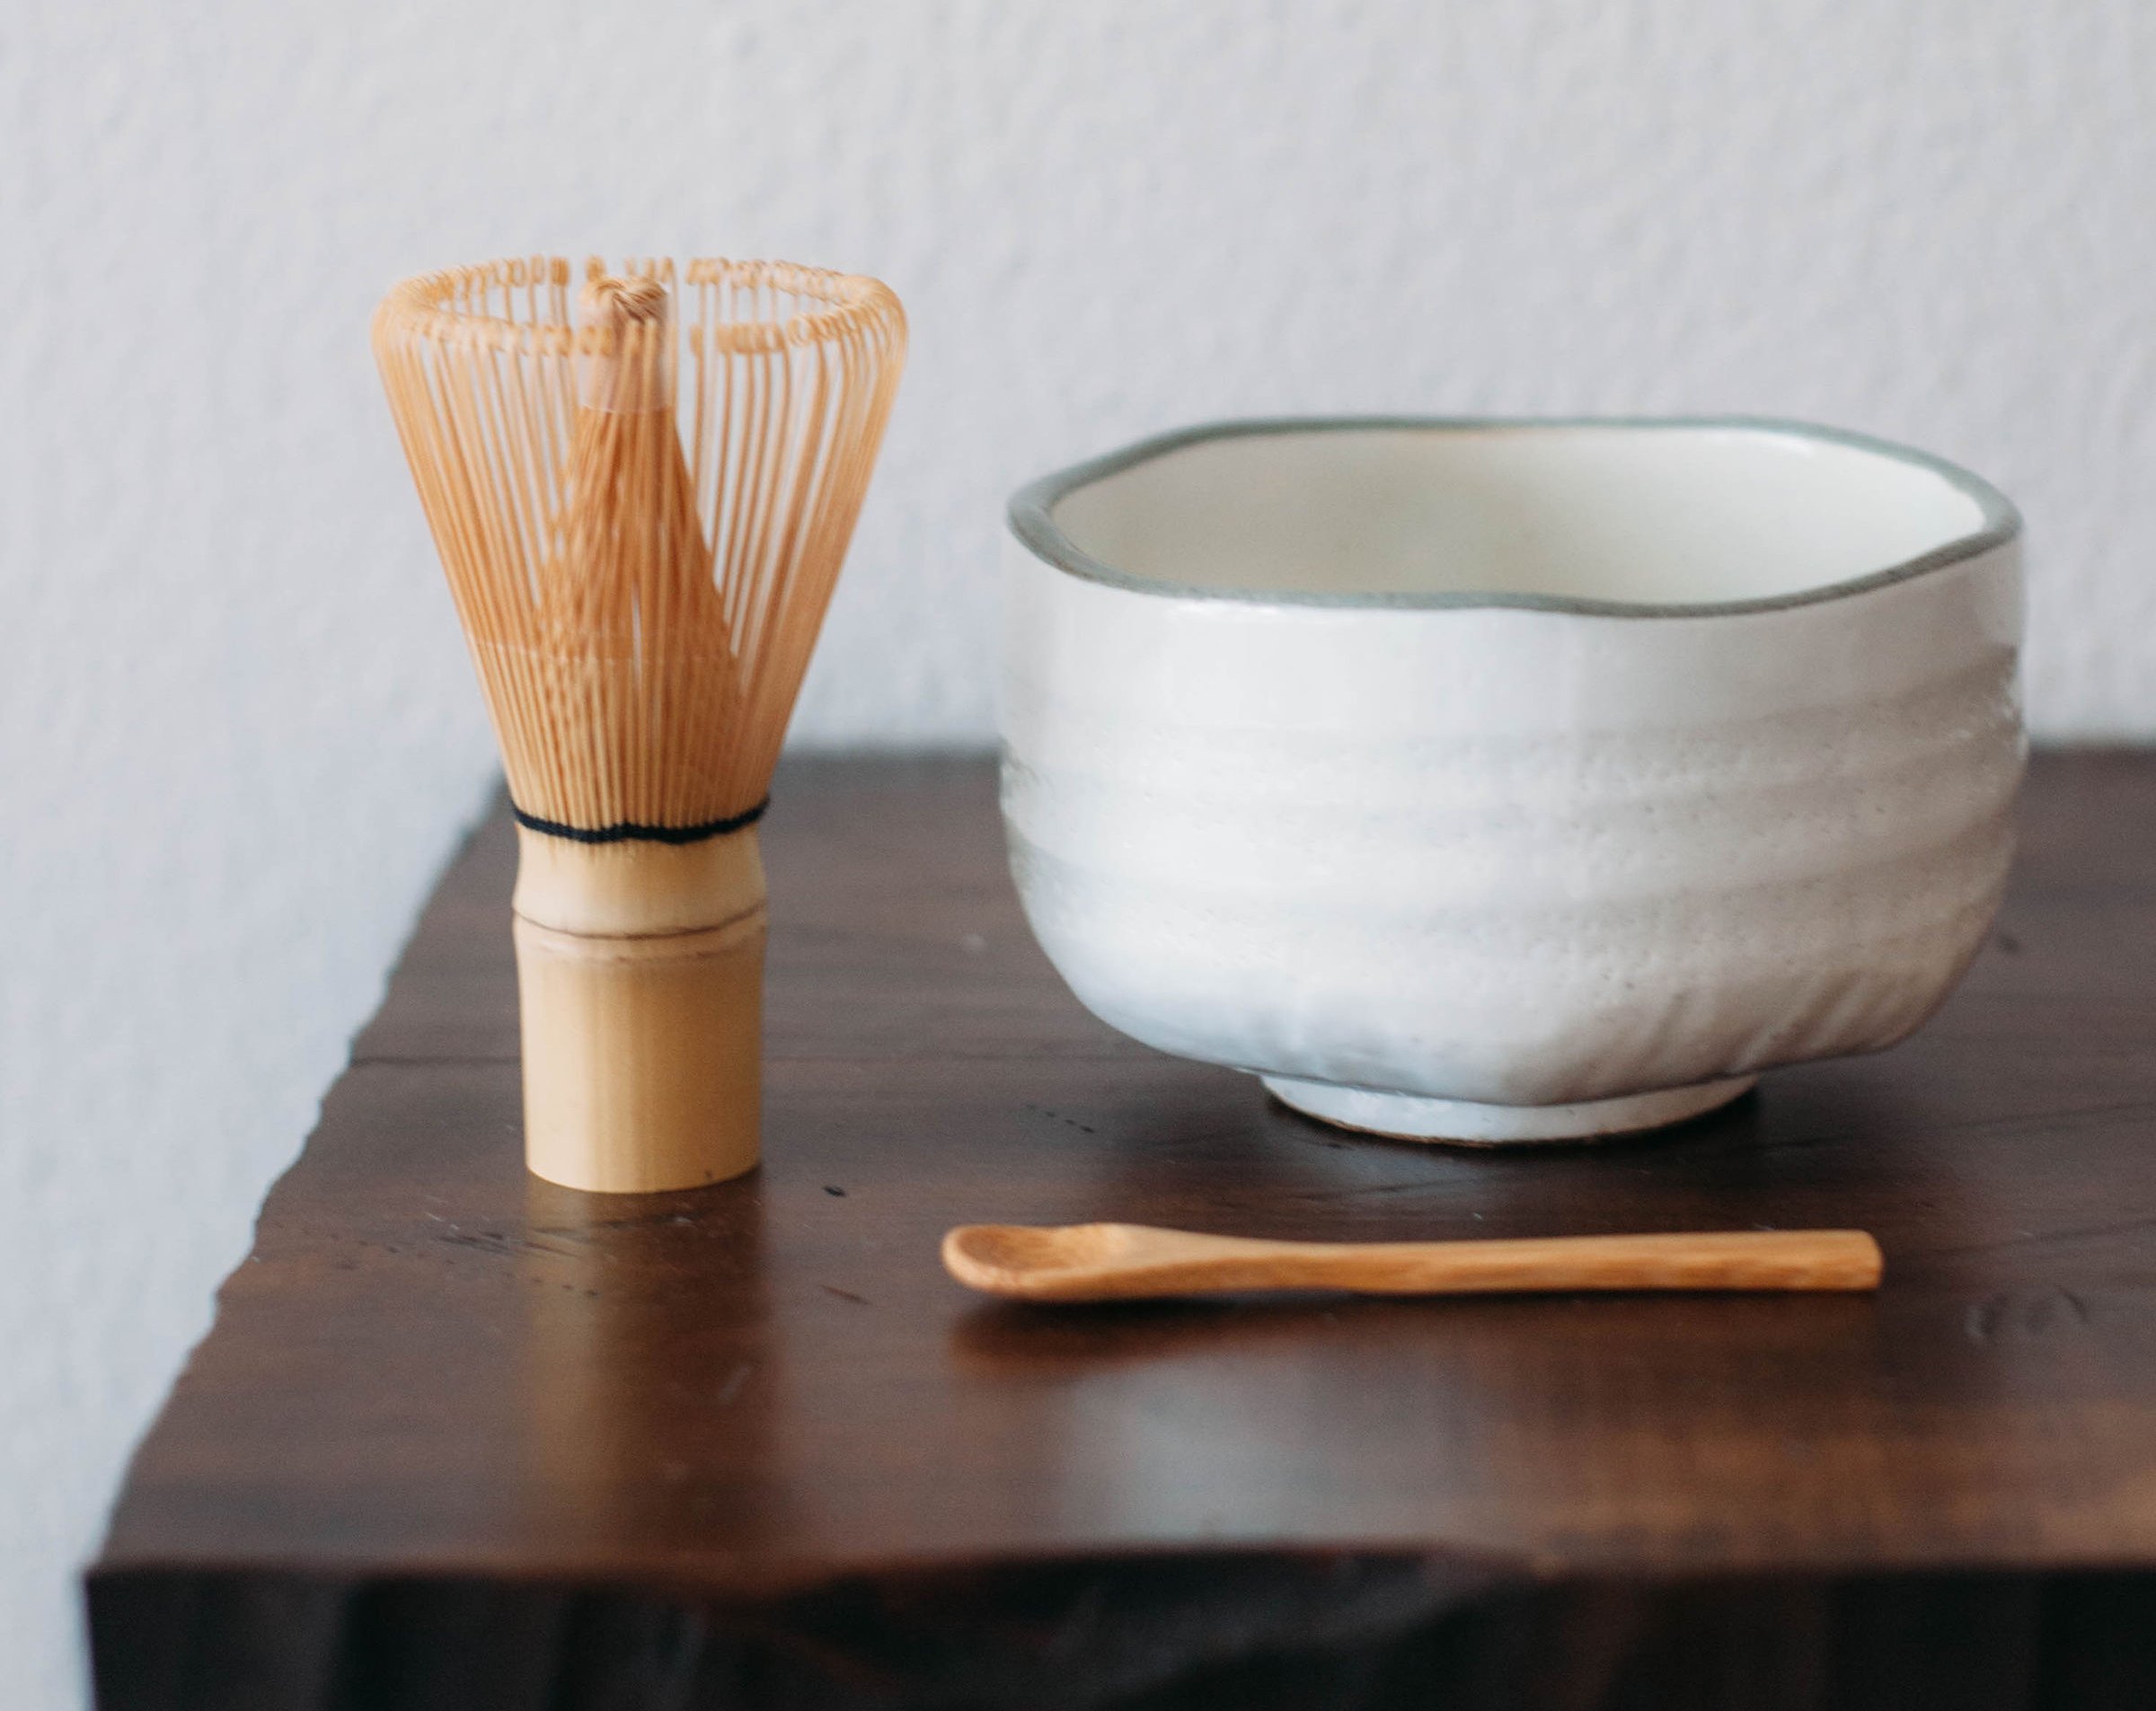 Firepot matcha accessories: a bamboo whisk, a white bowl, and a wooden spoon